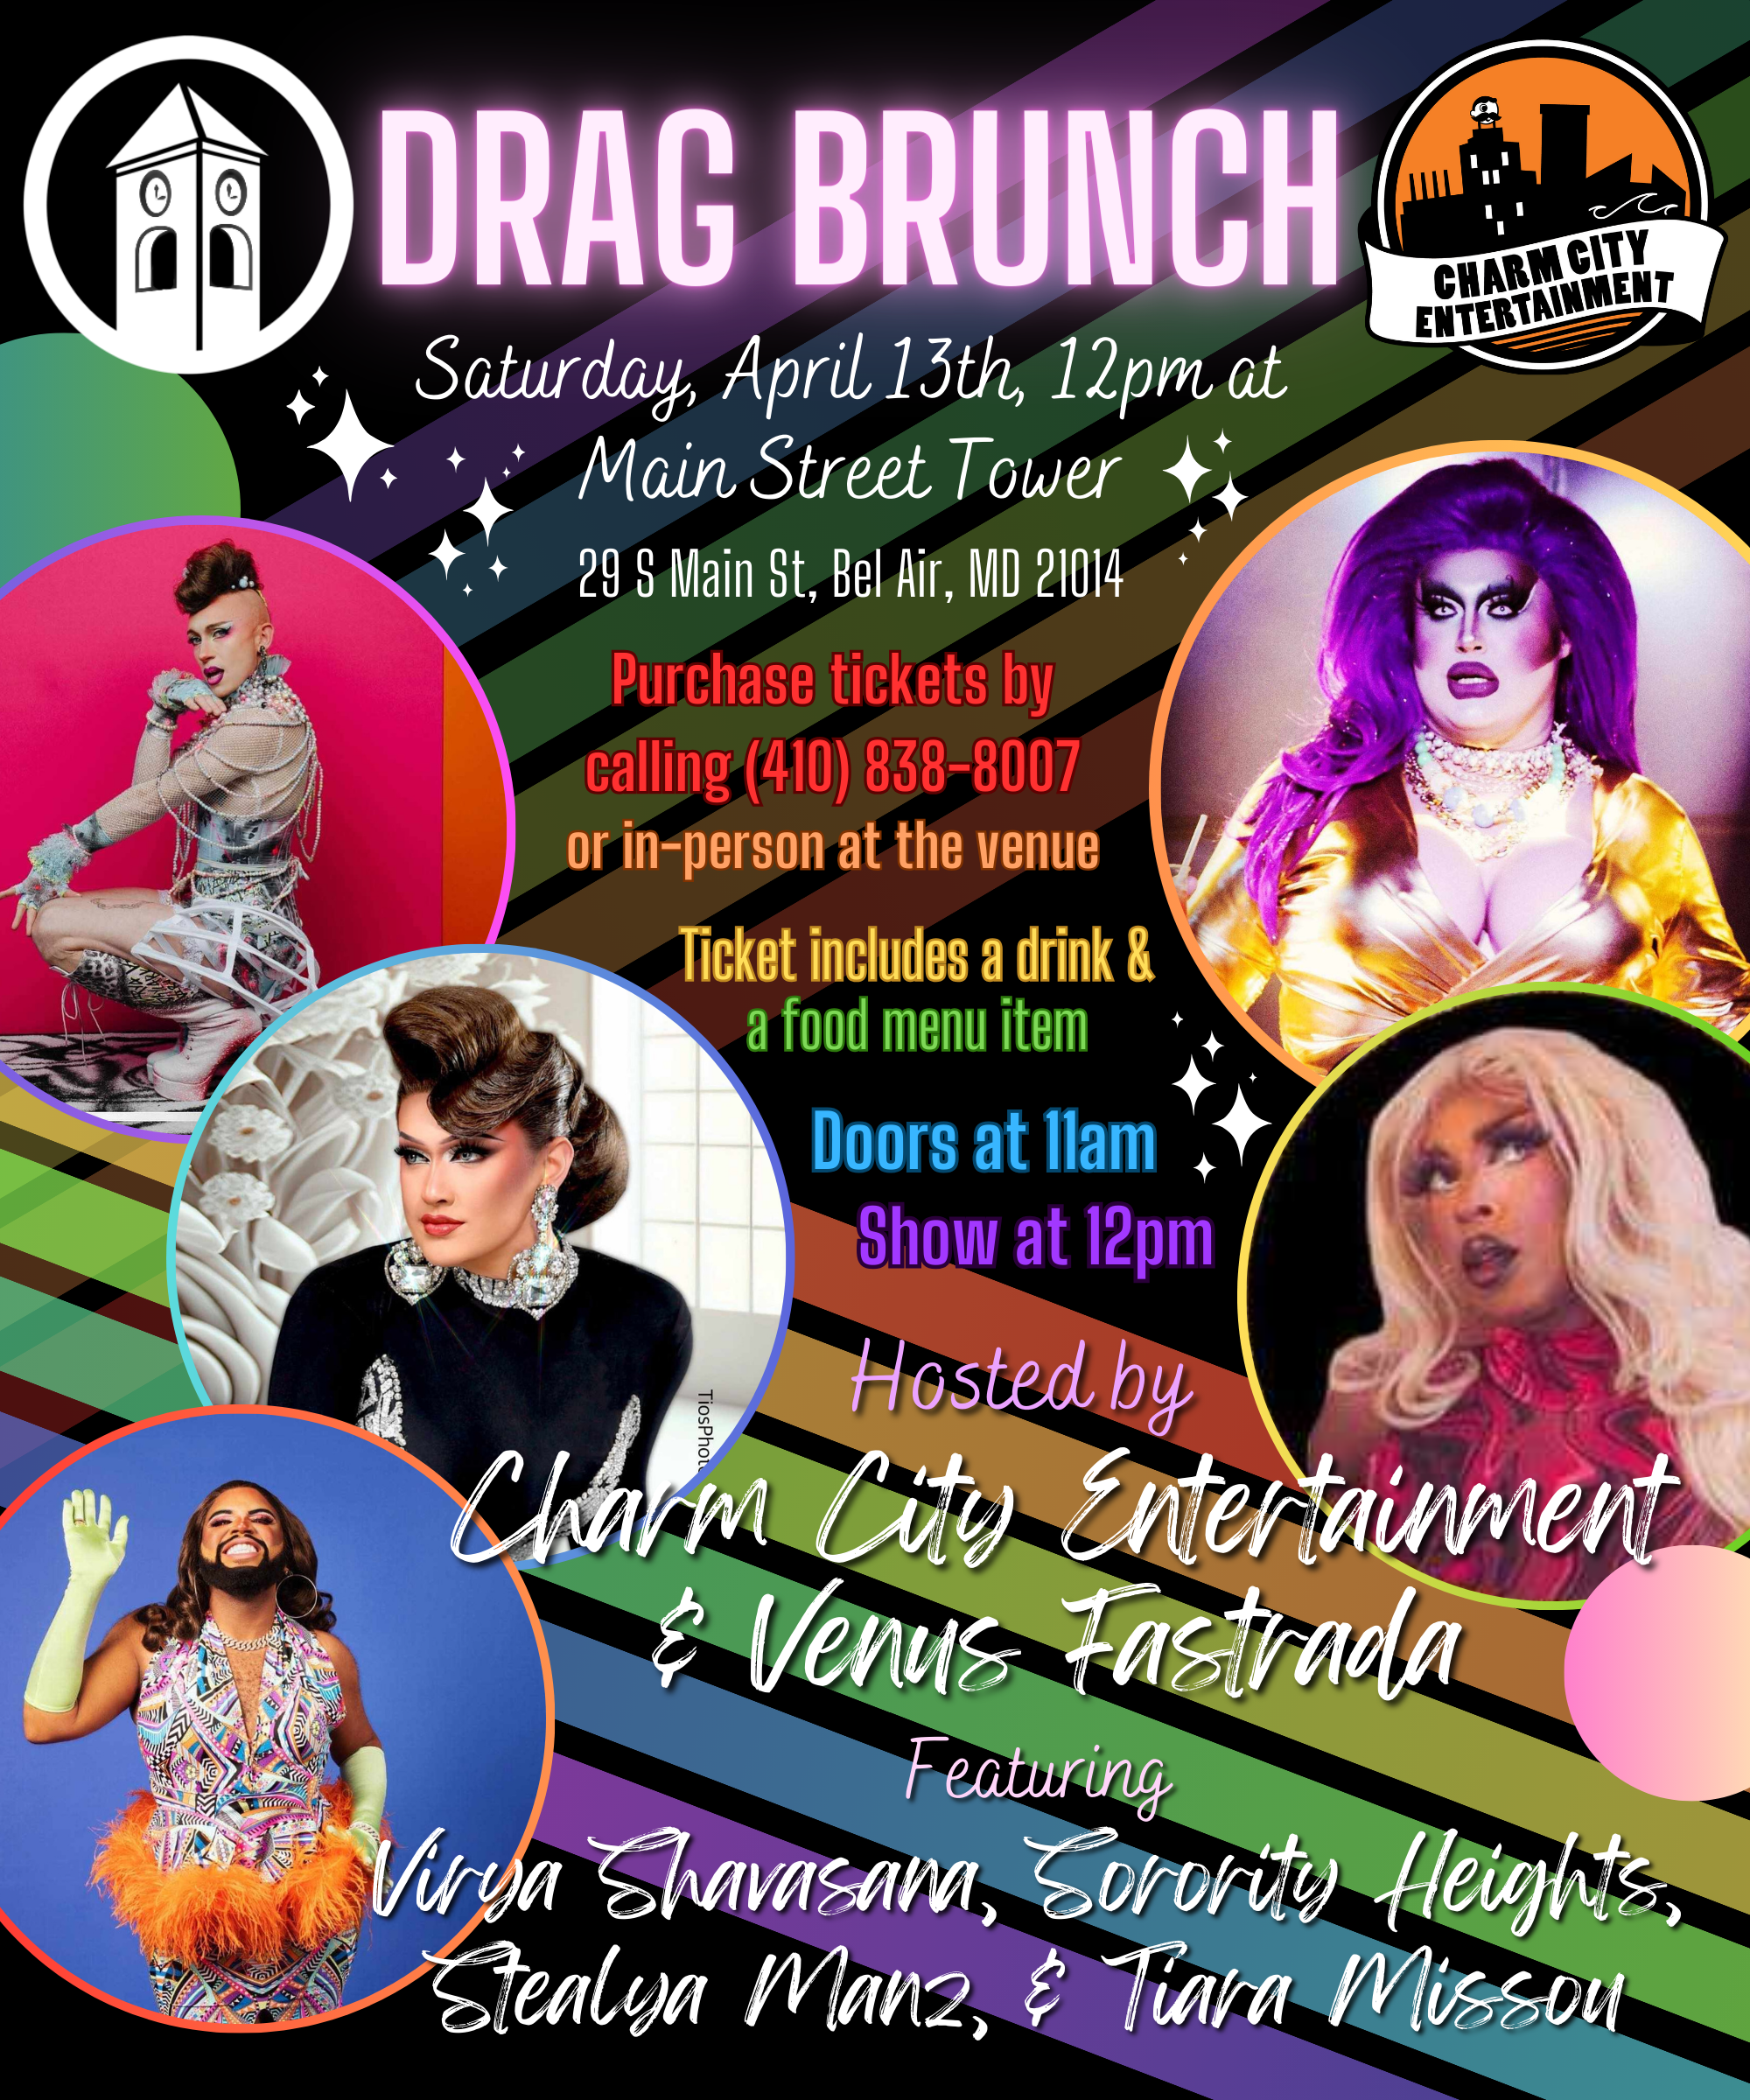 a black background with a rainbow zigzag, sparkles, the Charm City Entertainment logo, the Main Street Tower logo, photos of the five Queens, and white, pink, red, orange, yellow, green, blue, and purple text. The text reads: Drag Brunch. Saturday, April 13th, 12pm at Main Street Tower. 29 S Main St, Bel Air, MD, 21014. Purchase tickets by calling (410) 838-8007 or in-person at the venue. Ticket includes a drink & a food menu item. Doors at 11am. Show at 12pm. Hosted by Charm City Entertainment & Venus Fastrada. Featuring Virya Shavasana, Sorority Heights, Stealya Manz, & Tiara Missou.